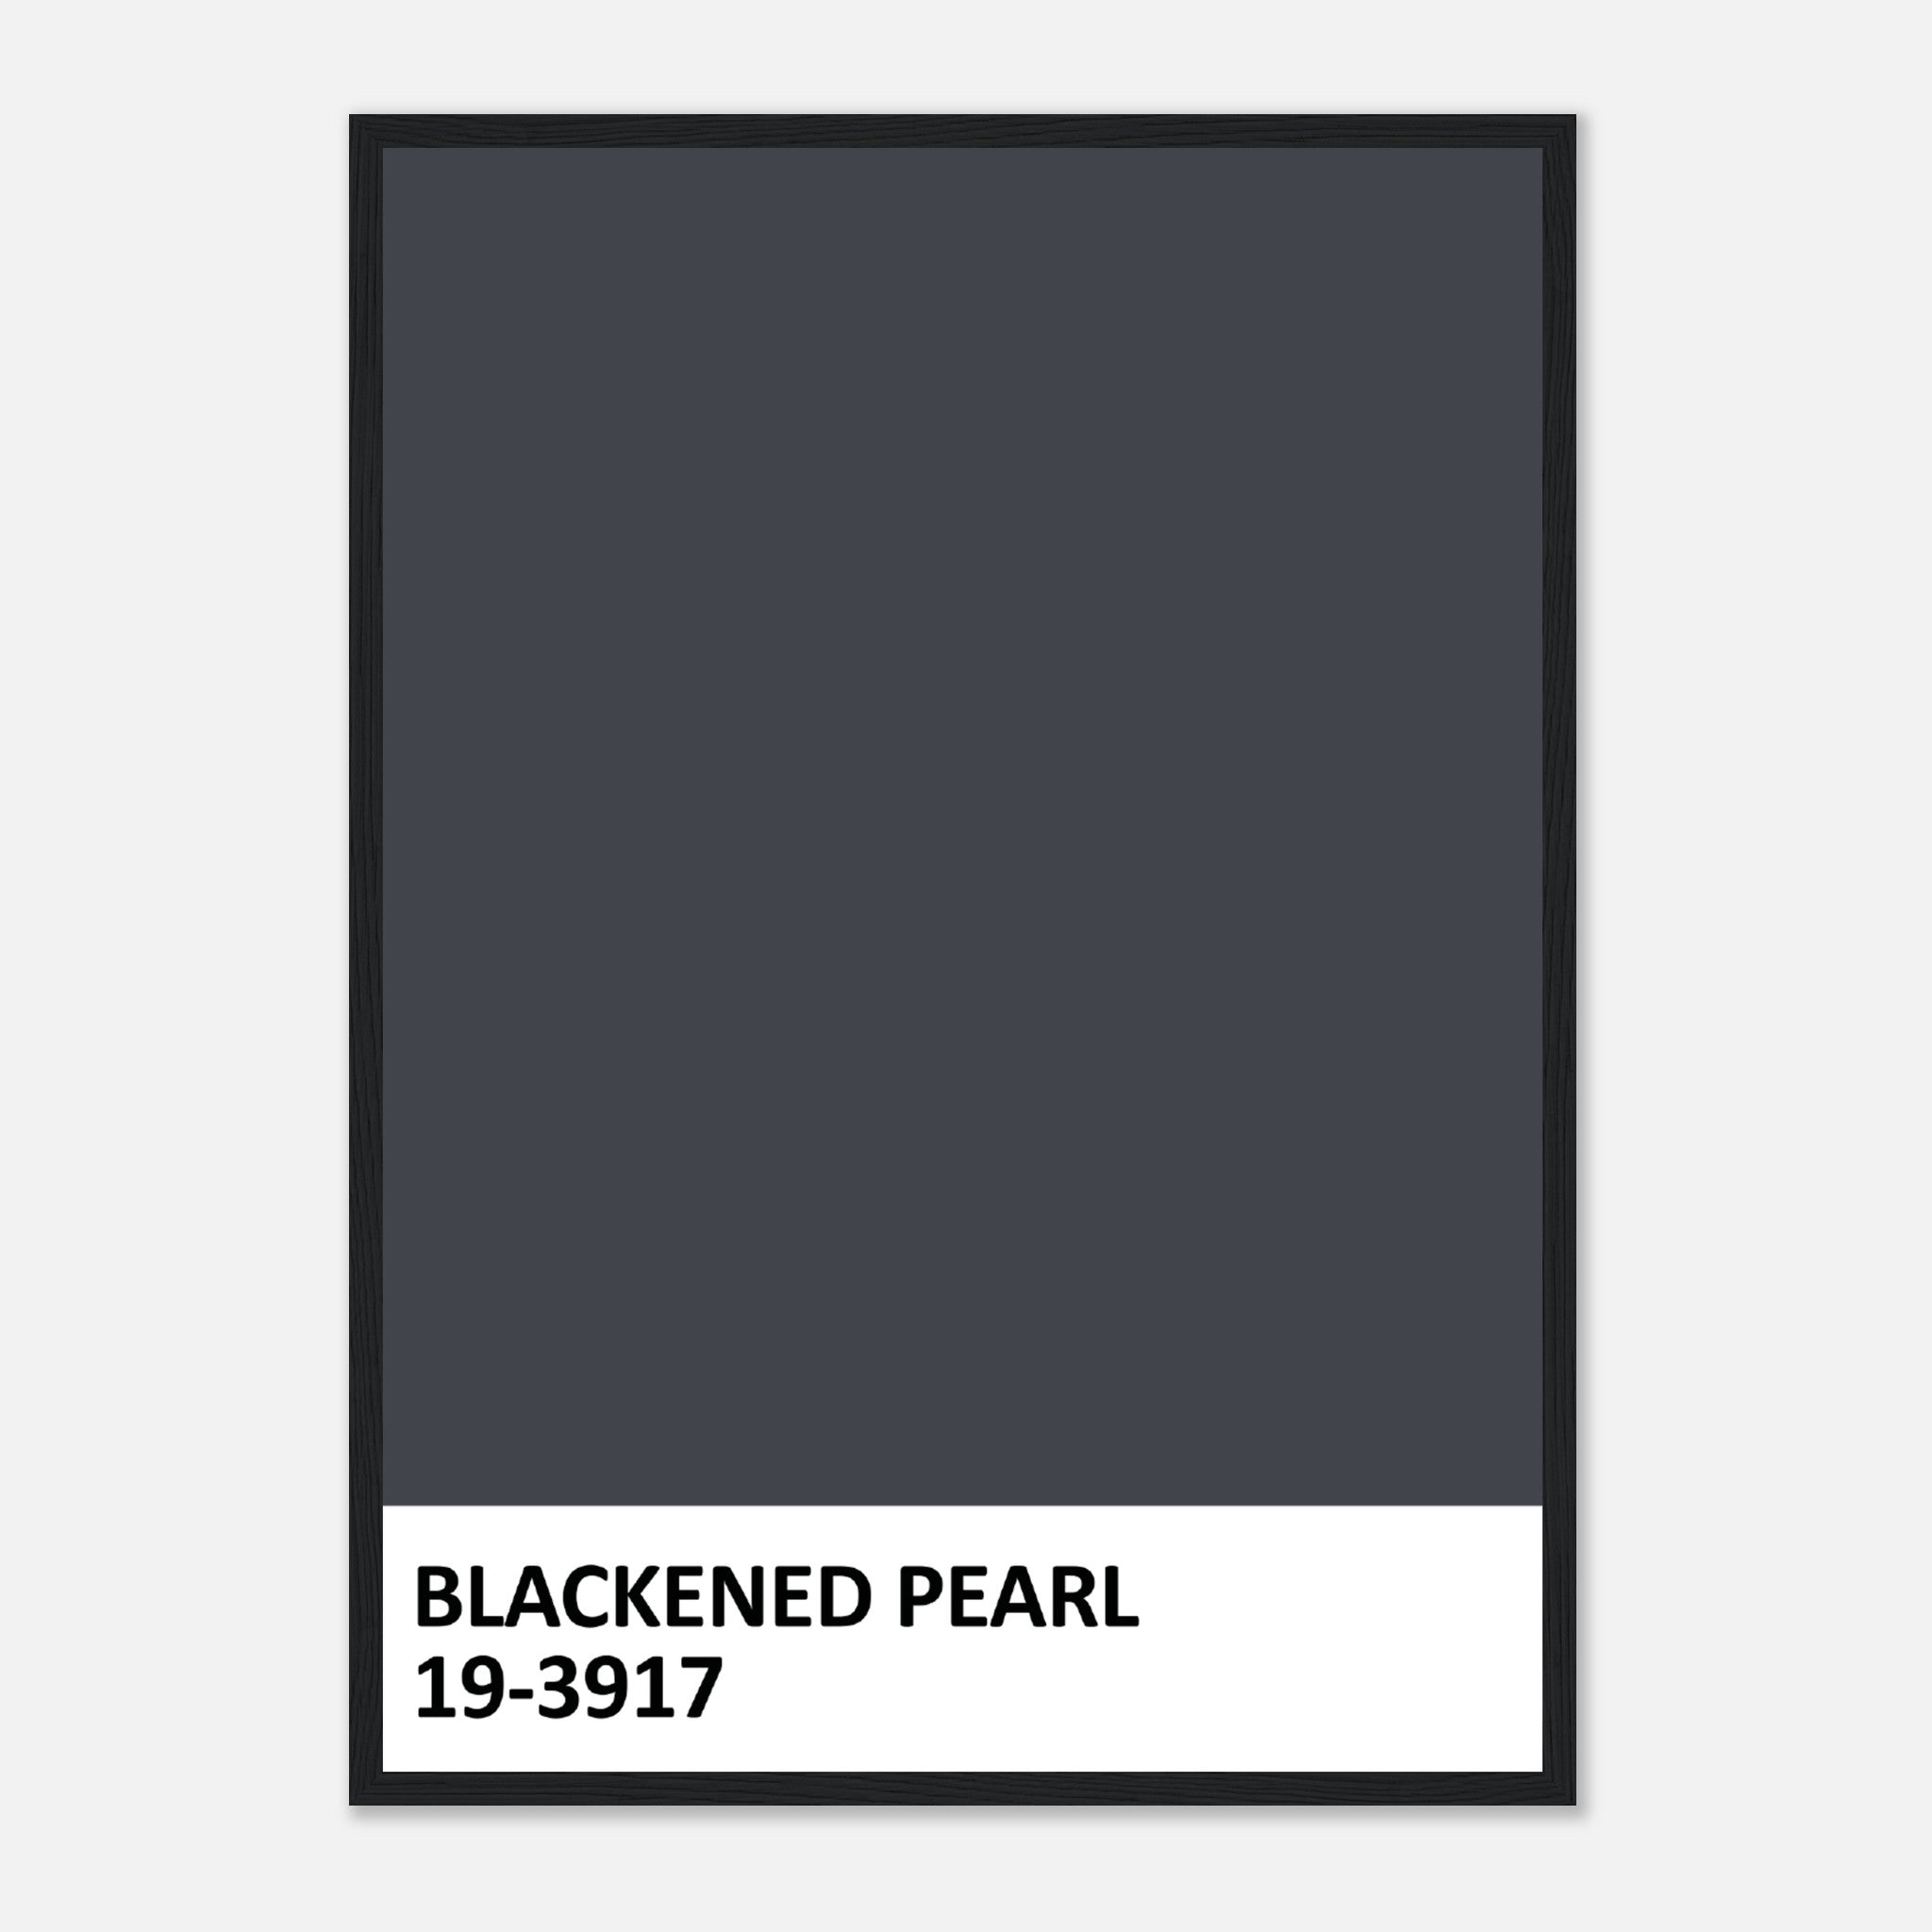 Paint Blackened Pearl Poster